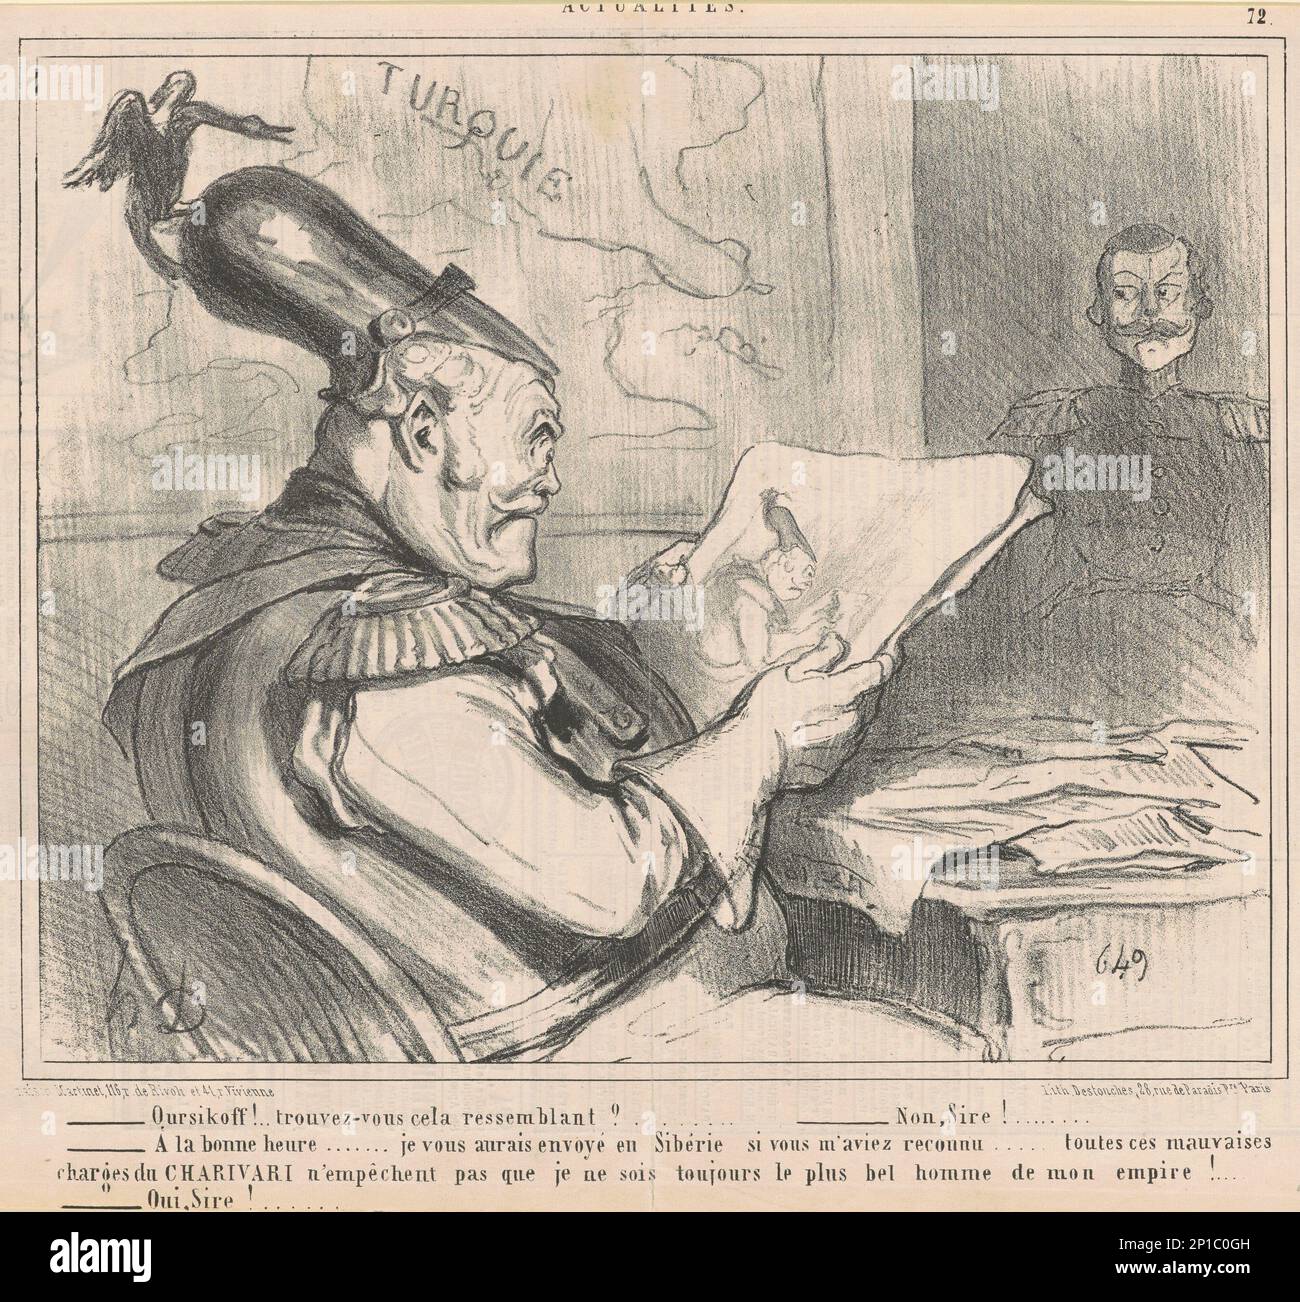 Oursikoff!..trouvez-vous cela ressemblant?, 19th century. Satire on the Crimean War. [Russian emperor]: Oursikoff! do you think this is a good likeness? [Oursikoff]: No, sire! [Emperor]: just as well...I would have sent you to Siberia if you'd recognised me...all these terrible Charivari accusations won't stop me being the most handsome man in my empire! [Oursikoff]: Yes, sire! Stock Photo